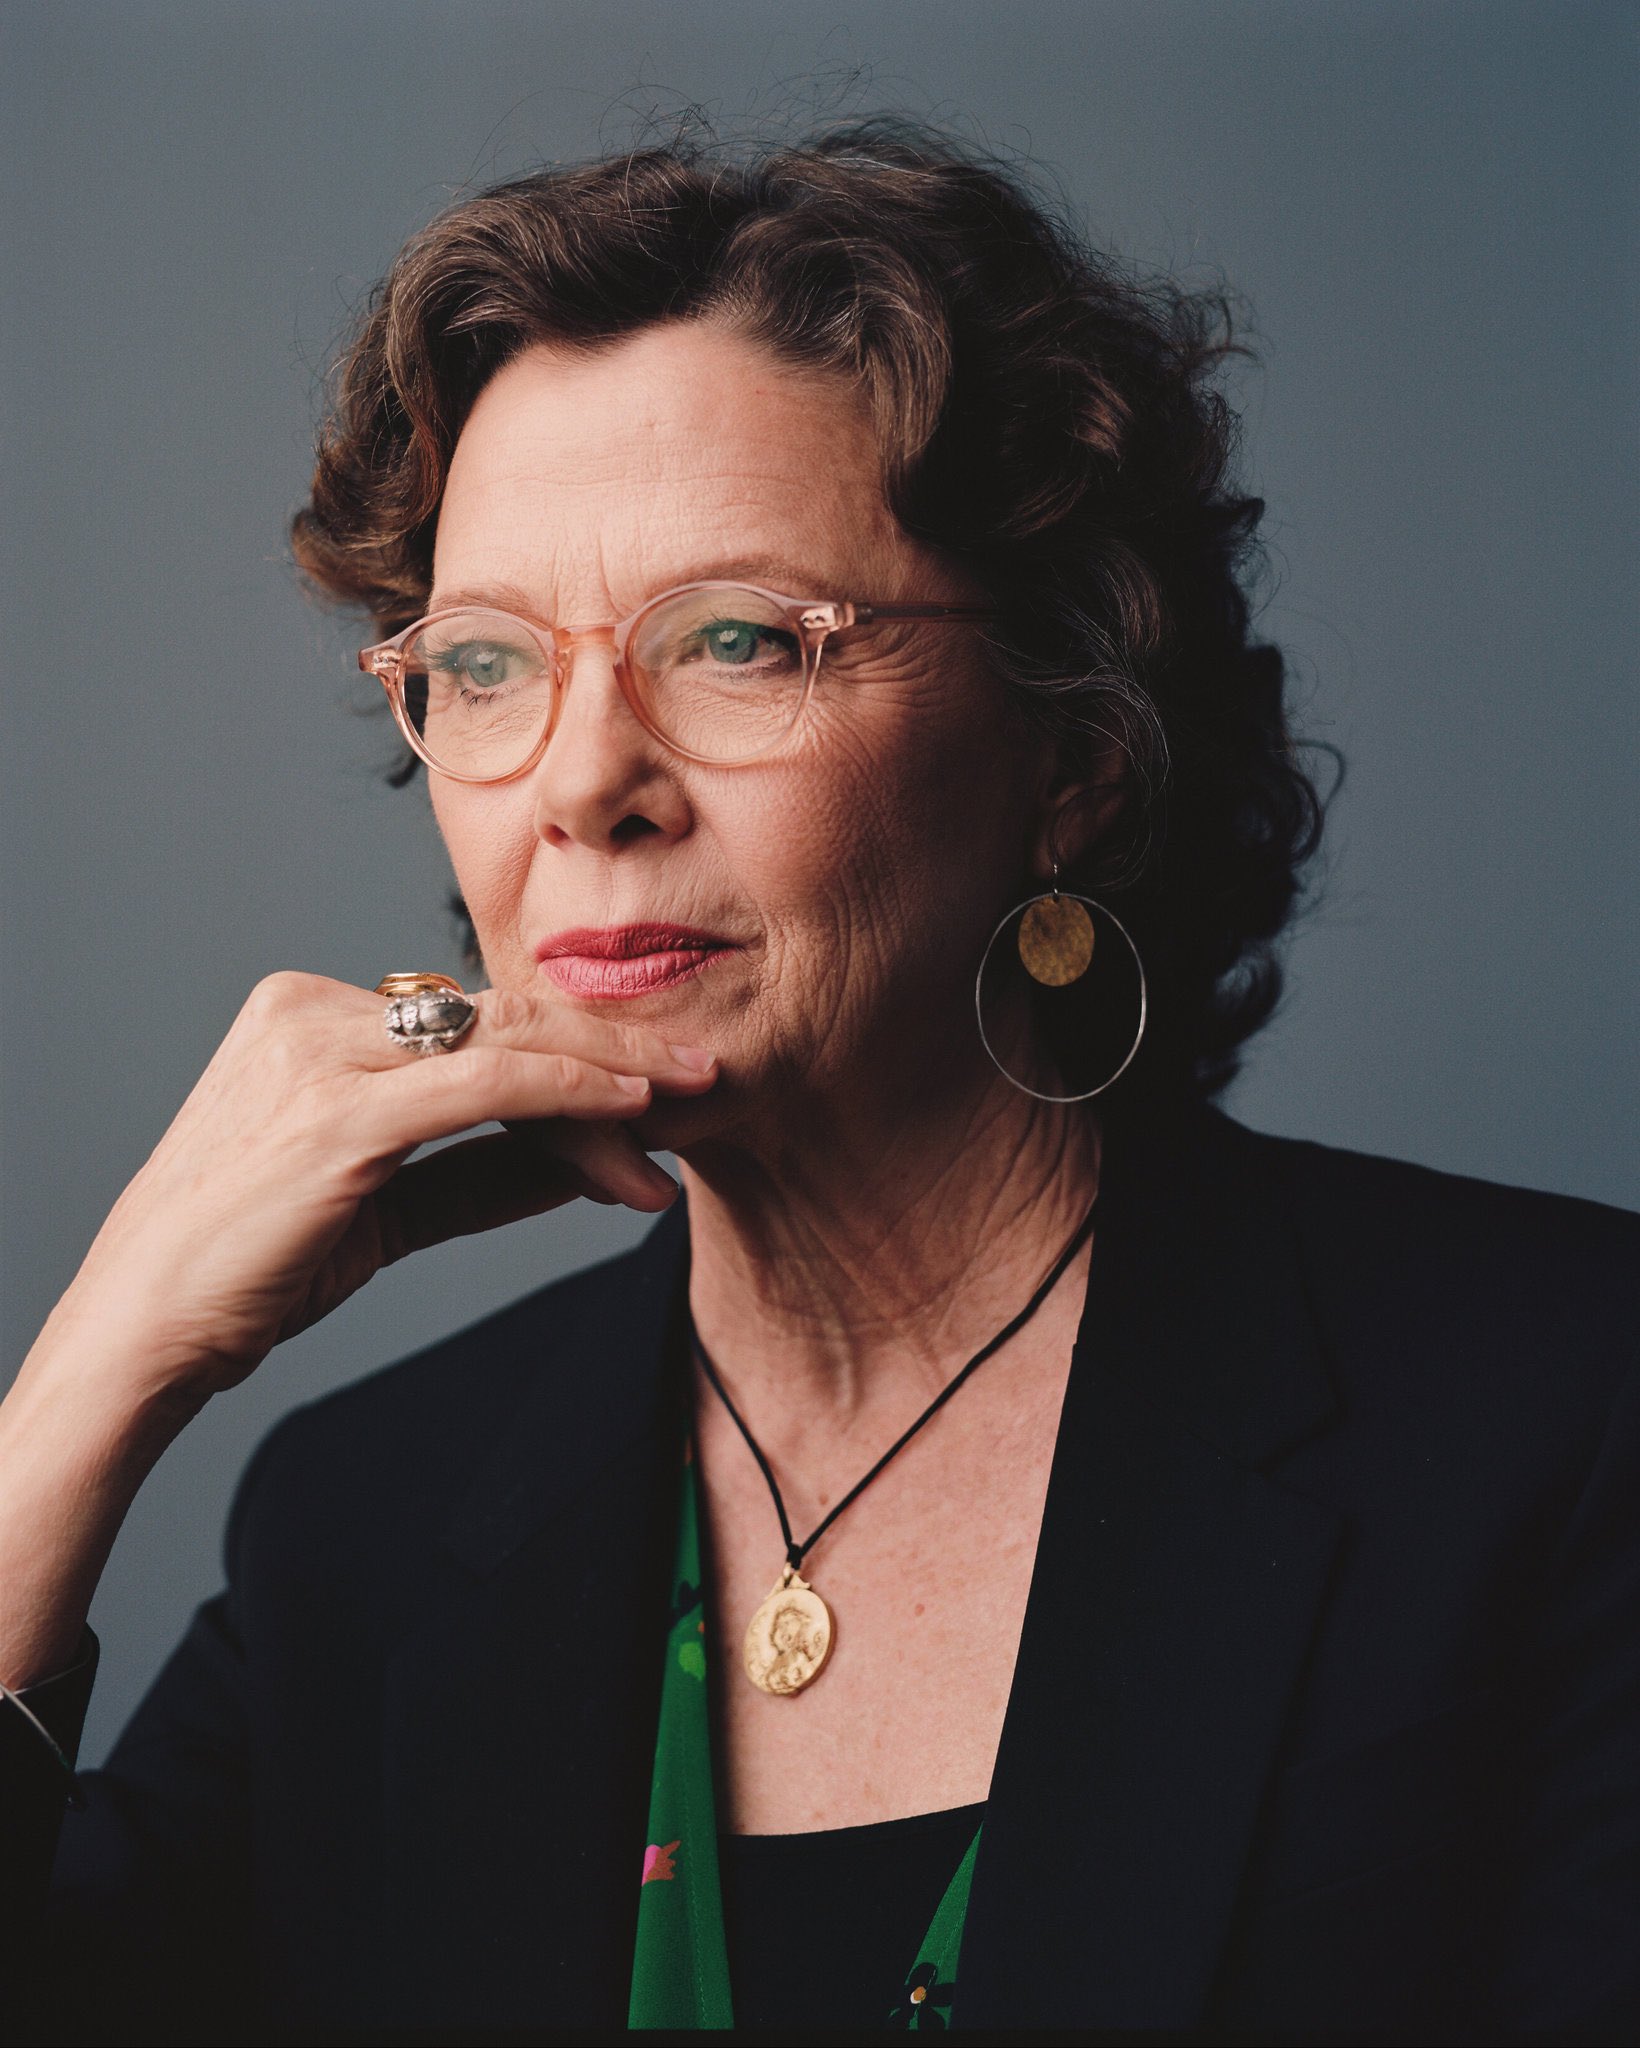 Happy birthday to the glorious Annette Bening, who should have a minimum of 2 Oscars and 10 nominations by now. 